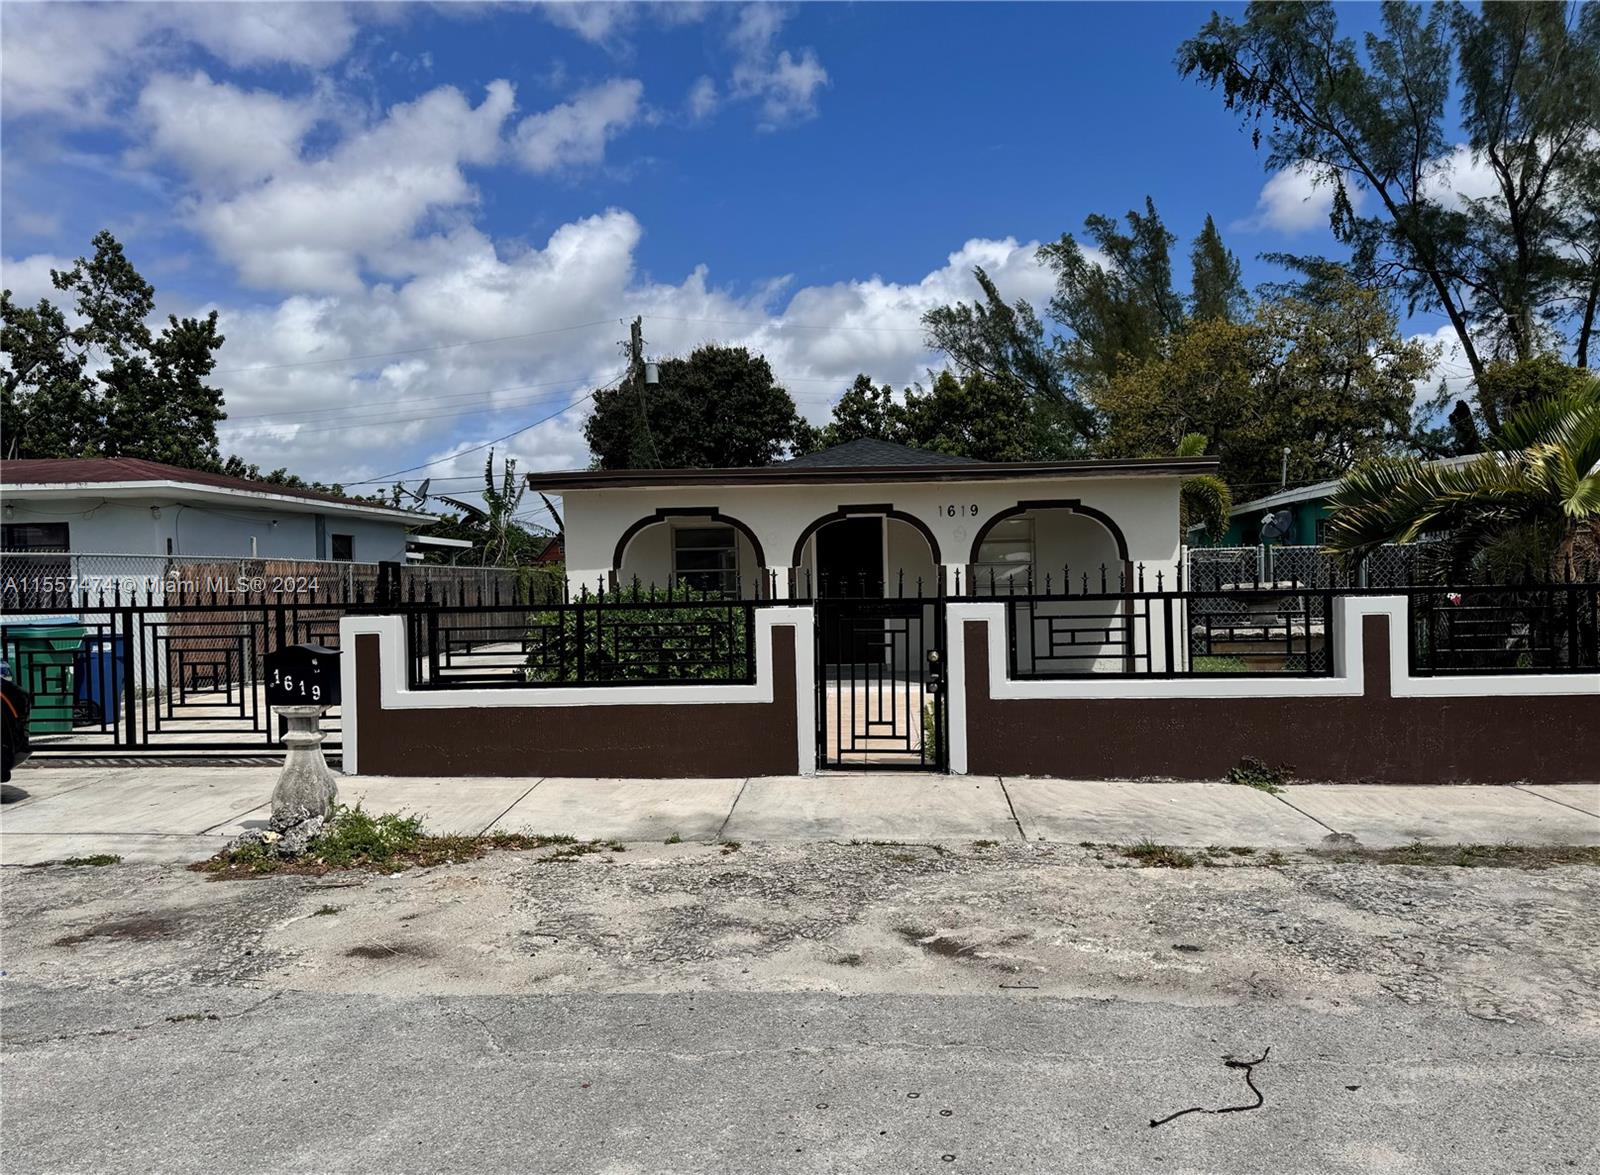 1619 Nw 112th St St, Miami, Broward County, Florida - 4 Bedrooms  
3 Bathrooms - 